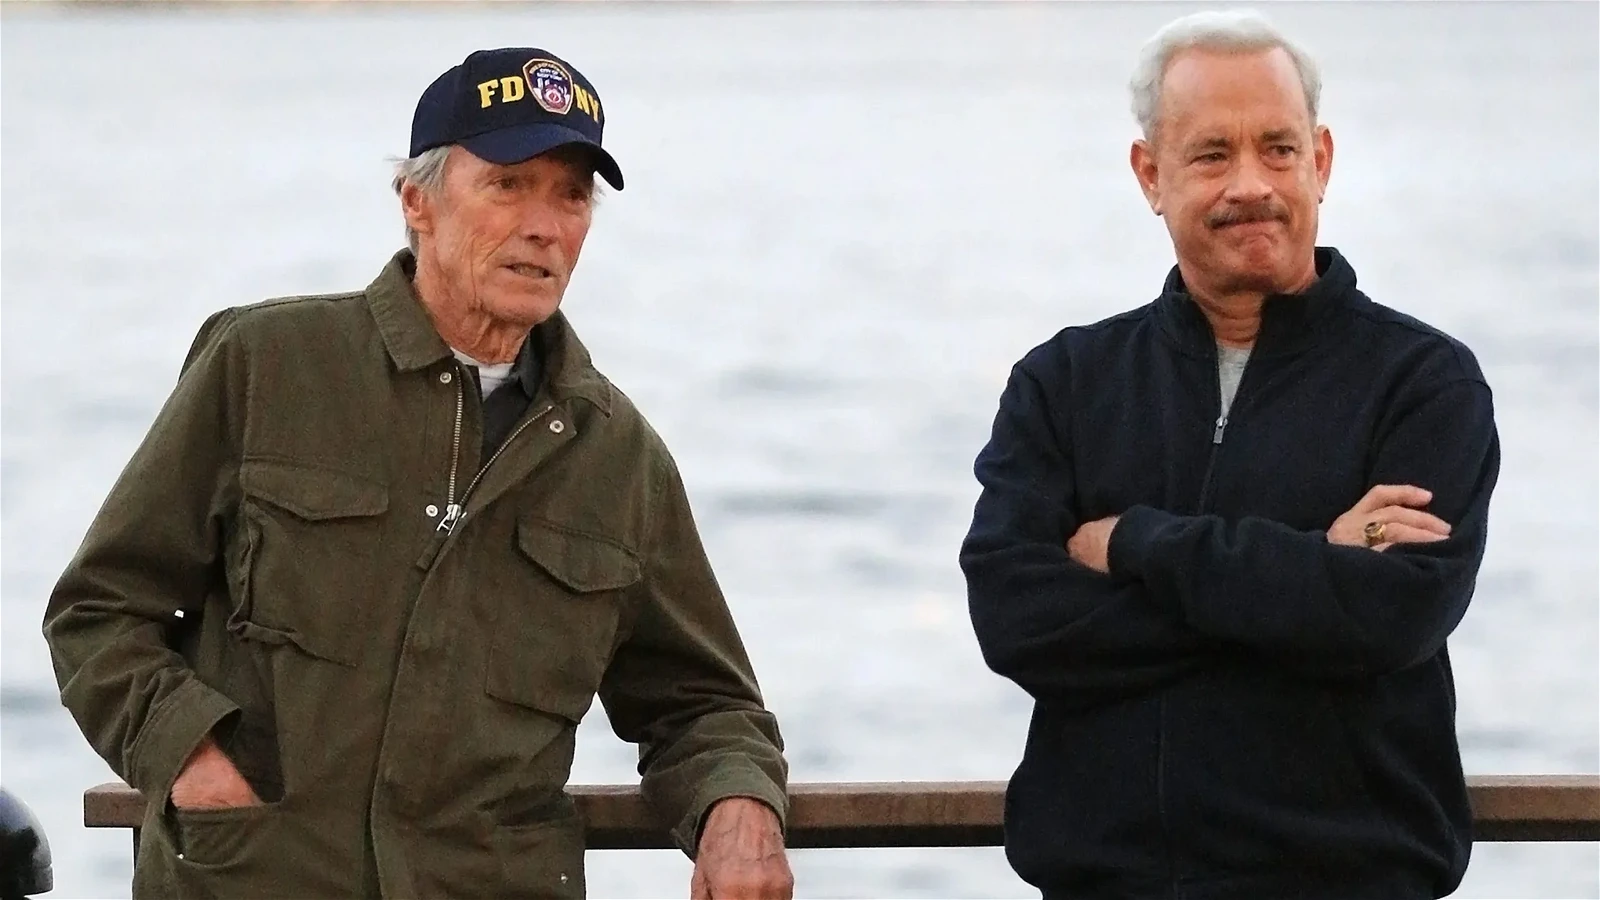 Clint Eastwood and Tom Hanks 